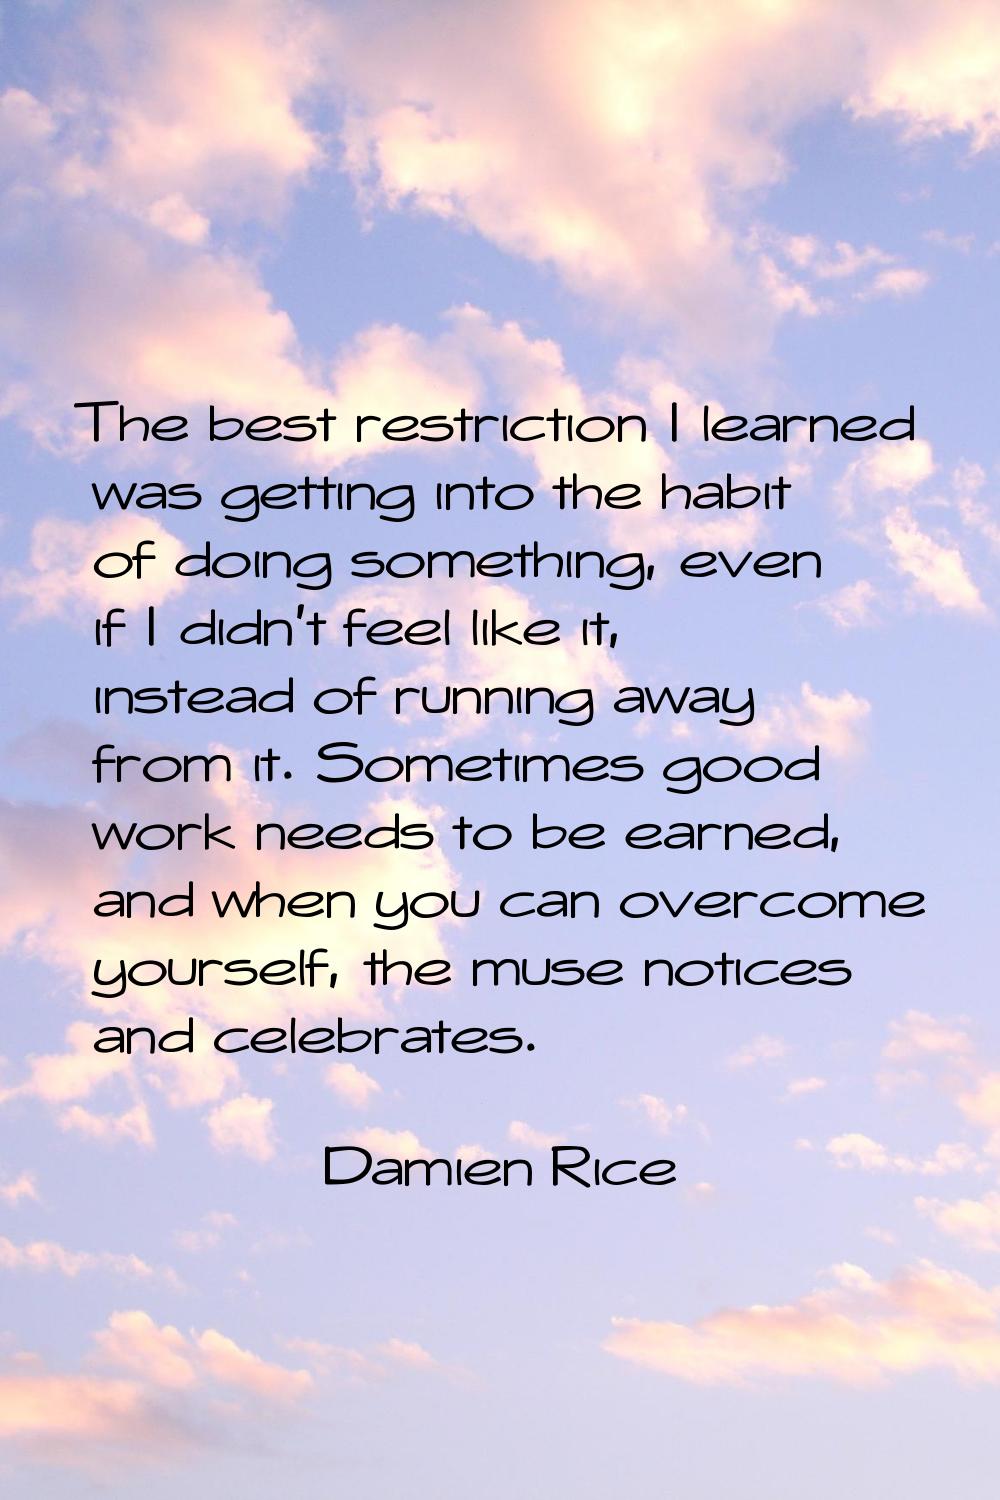 The best restriction I learned was getting into the habit of doing something, even if I didn't feel